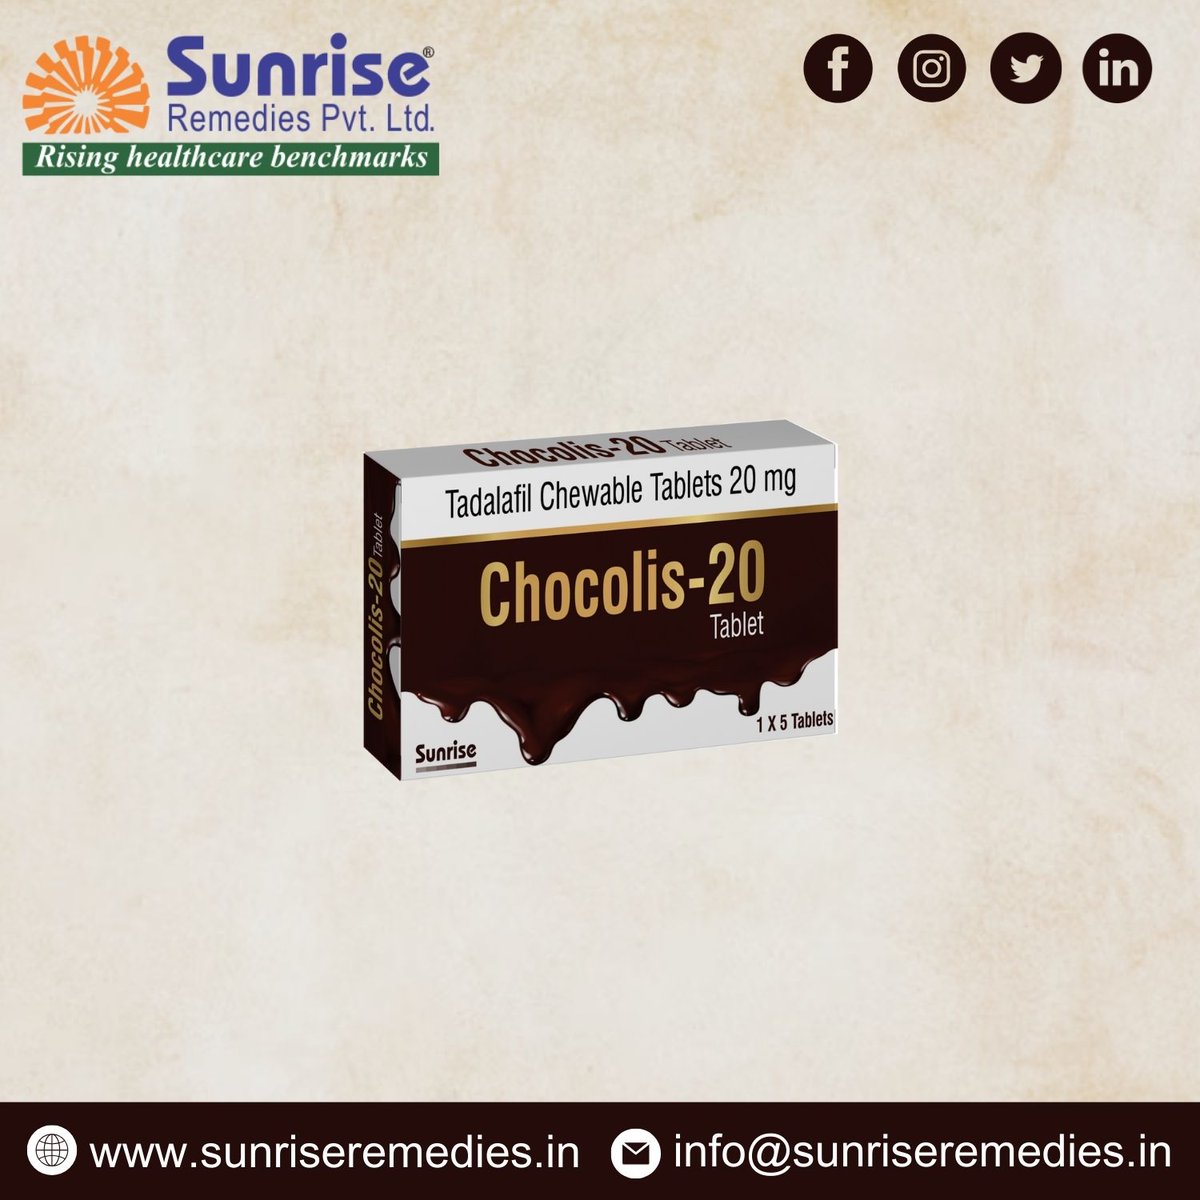 Cozy Moments With #ChocolisChewable Contains Tadalafil Chewable.

Read More: sunriseremedies.in/our-products/c…

#Chocolis #TadalafilChewable #SildenafilChewable #DapoxetineProducts #VardenafilProducts #AvanafilProducts #UdenafilProducts #TadalafilProducts #SildenafilProducts #ED #PE